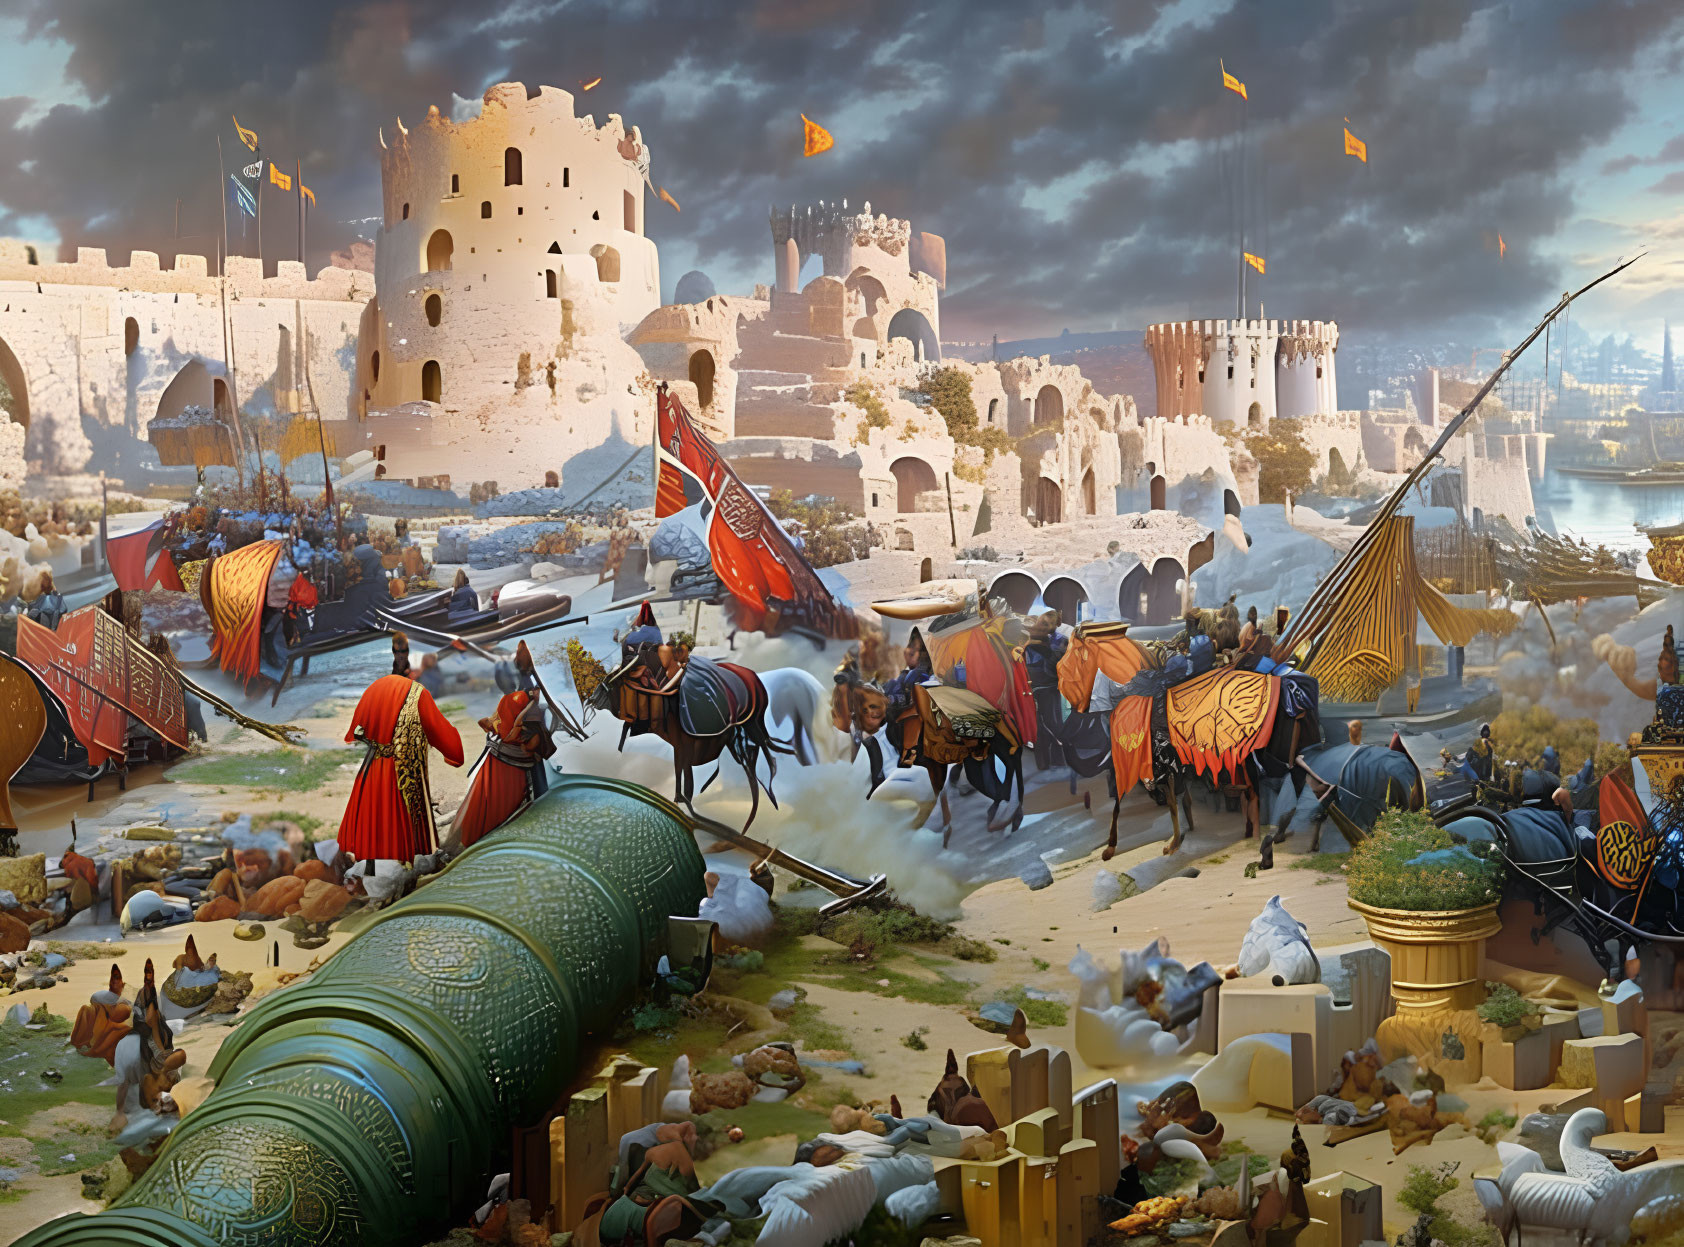 Medieval siege scene with knights, archers, trebuchets, and city walls